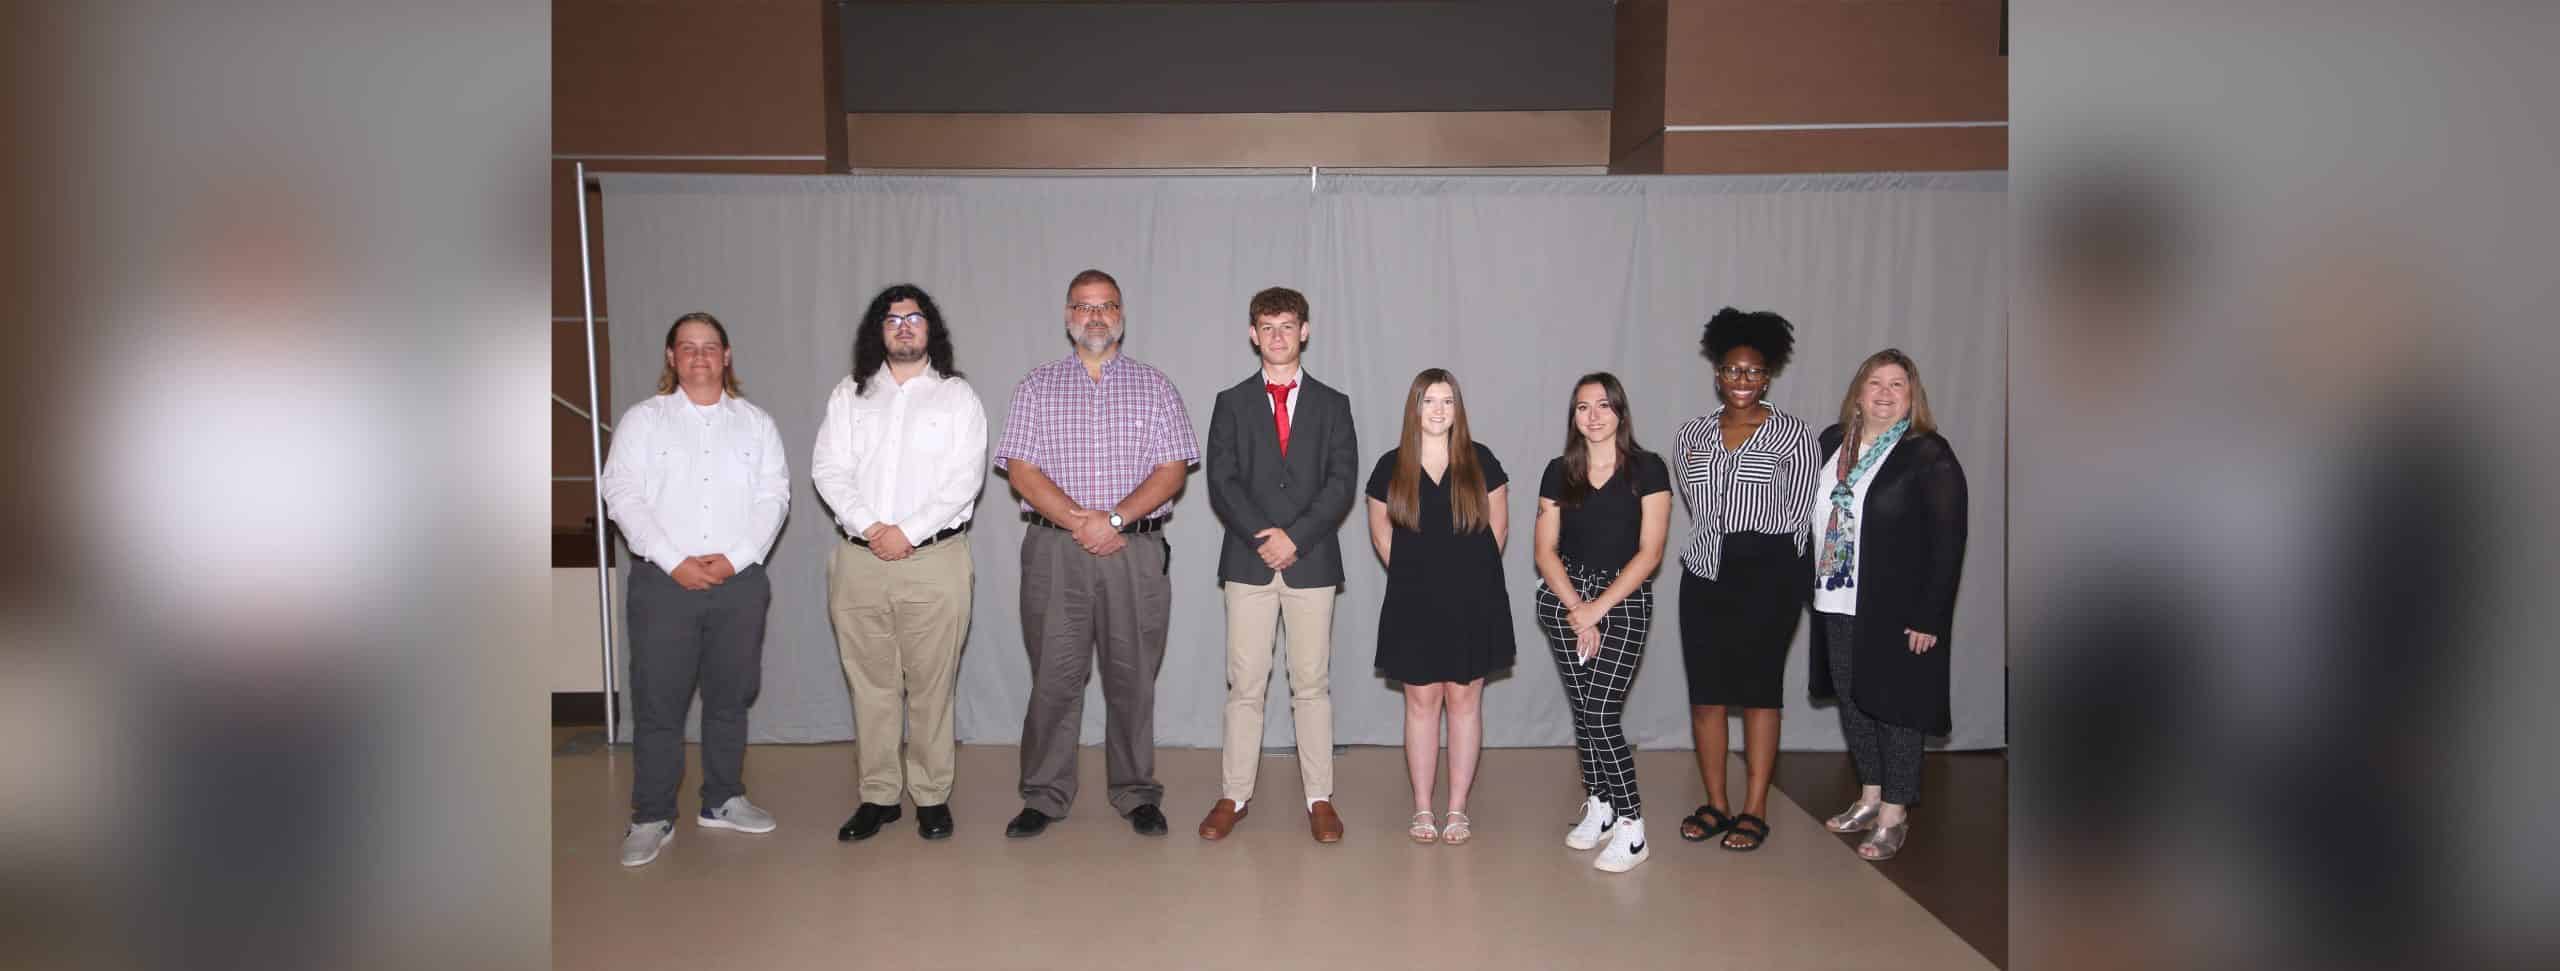 Levi Goldman of Pelahatchie, who received the John & Marie Pervangher Endowed Scholarship; Dylan Havemann of Clinton, who received the C. Leonard & Jane Woods Katzenmeyer Endowed Scholarship; Charles Katzenmeyer of Vicksburg, Justin Hasty of Vicksburg, Emily Philipson of Vicksburg and Shannon Harpole of Vicksburg, all of whom received the John & Marie Pervangher Endowed Scholarship, and Nkyah Kendrick of Jackson